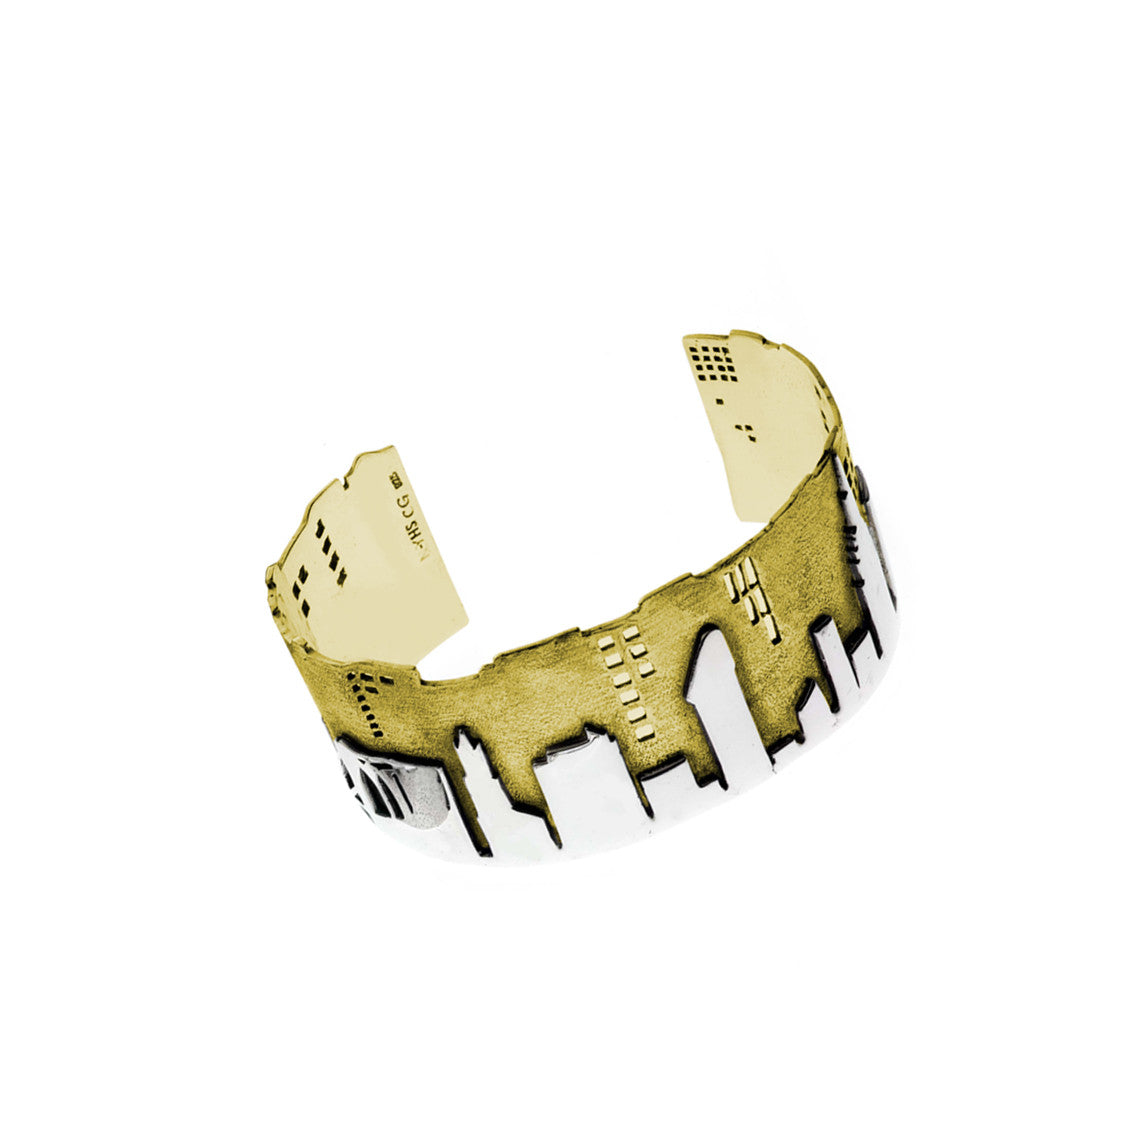 NYC Skyline The City That never Sleeps Sterling Silver & Brass Cuff - Cynthia Gale New York - 1